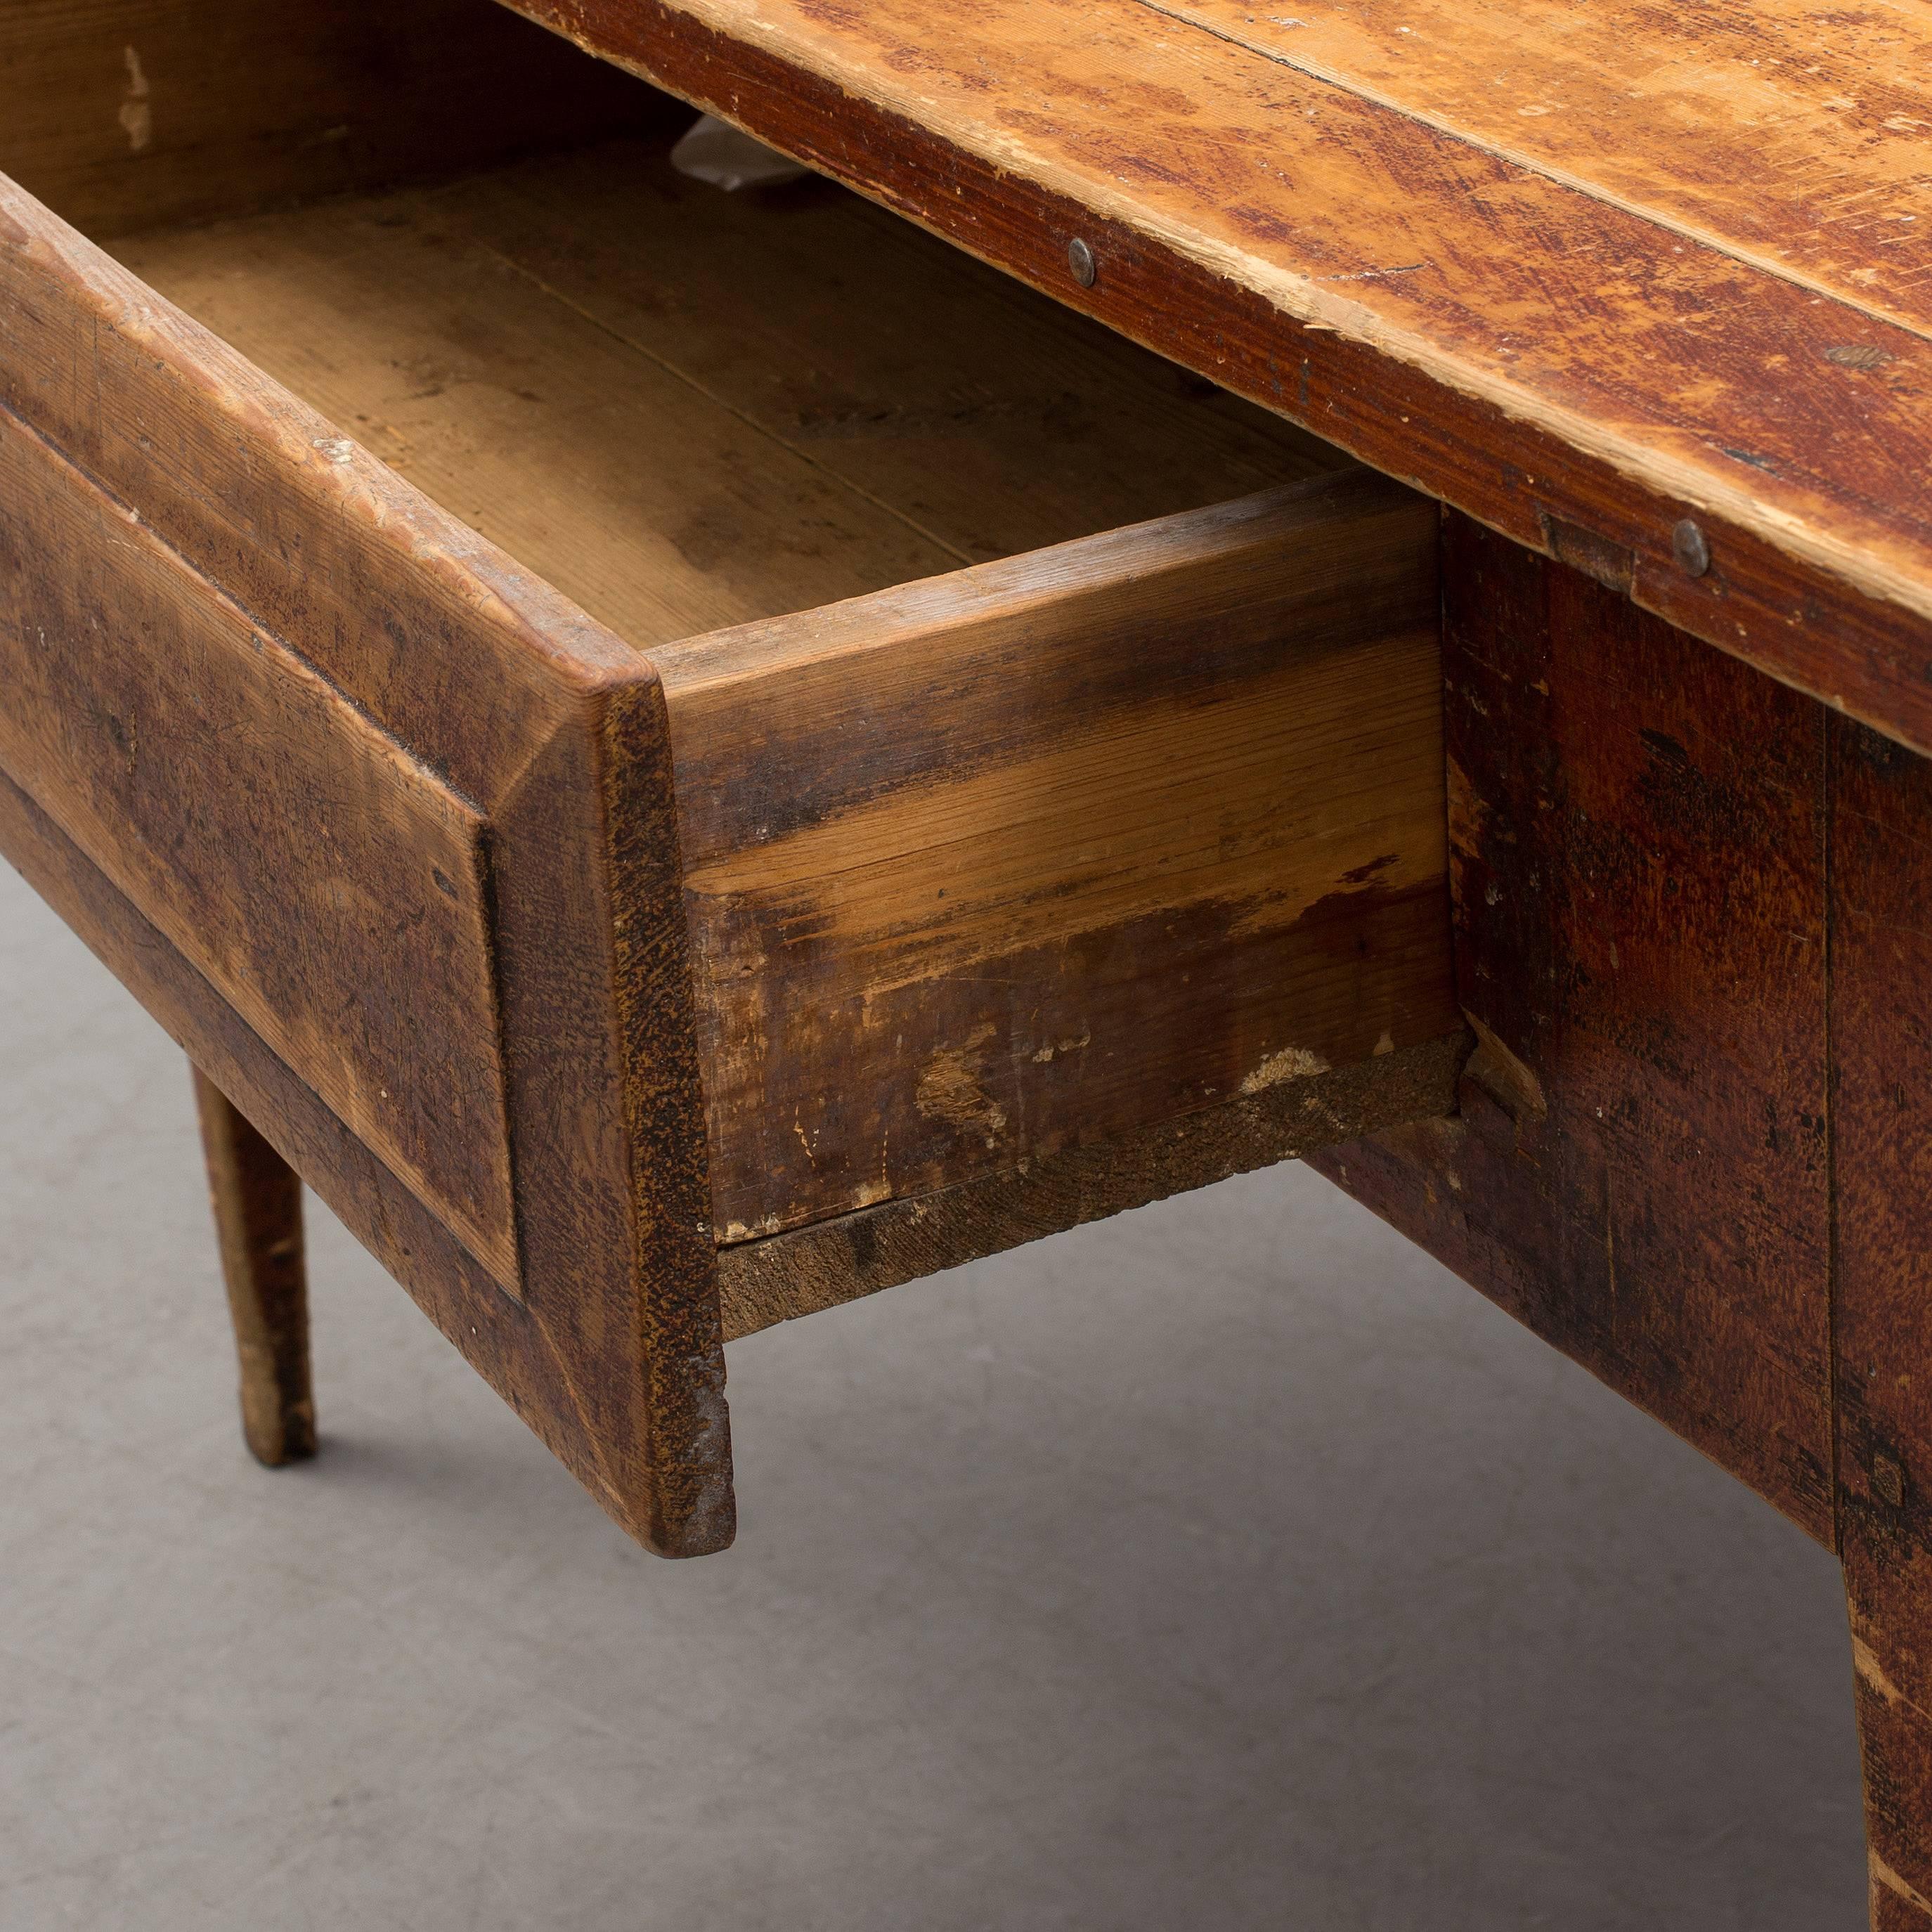 Swedish Folk Art table with large drawer and beautiful old patina, from mid-18th century.